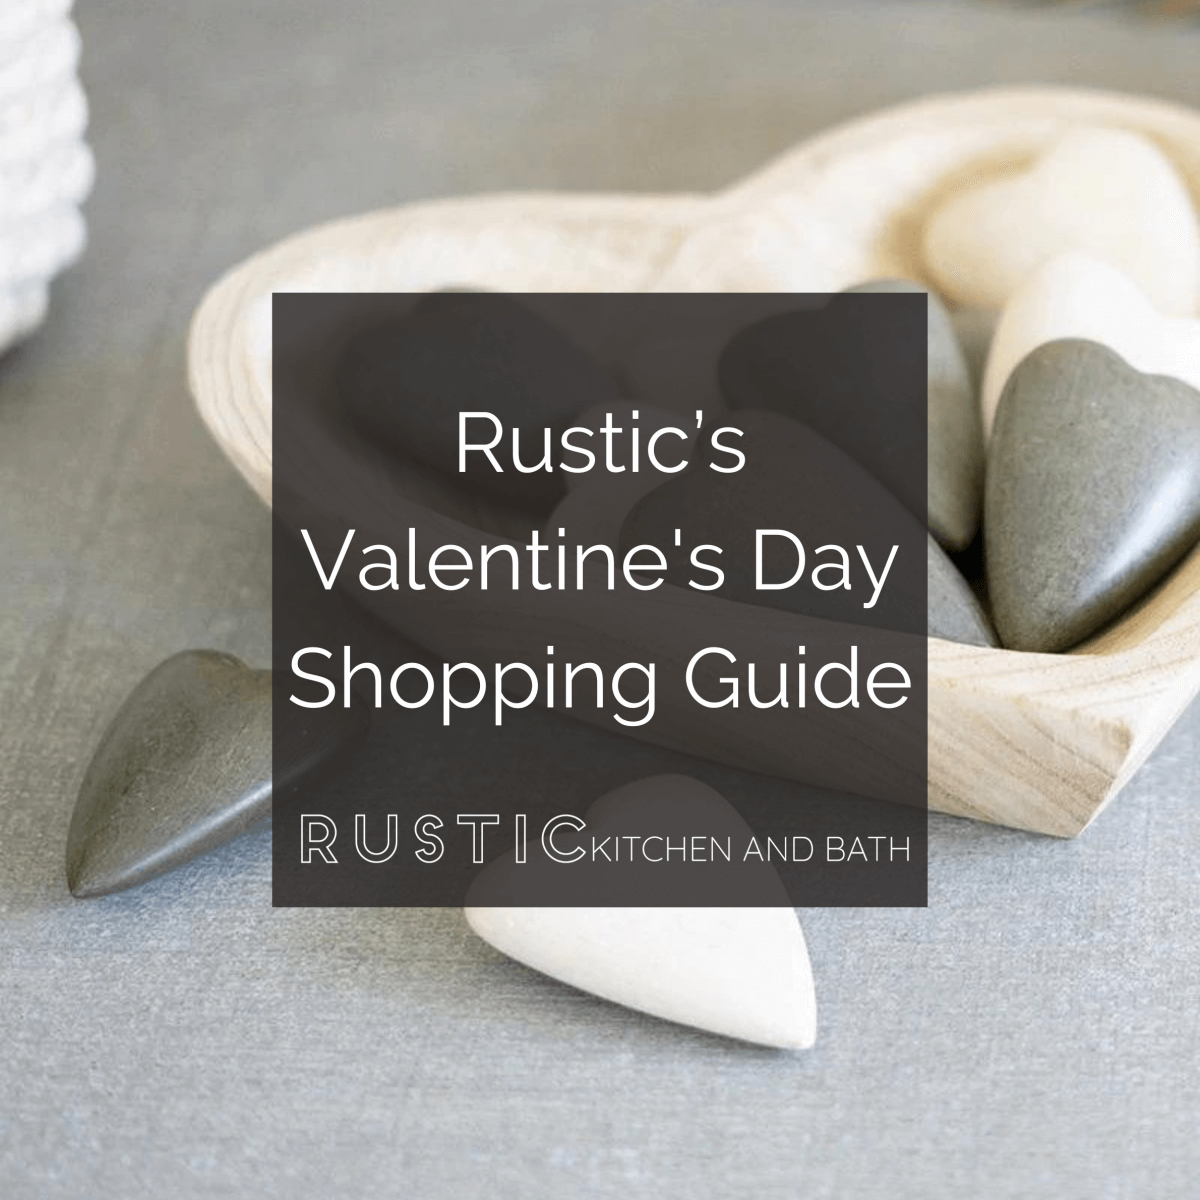 Rustic’s Valentine's Day Shopping Guide